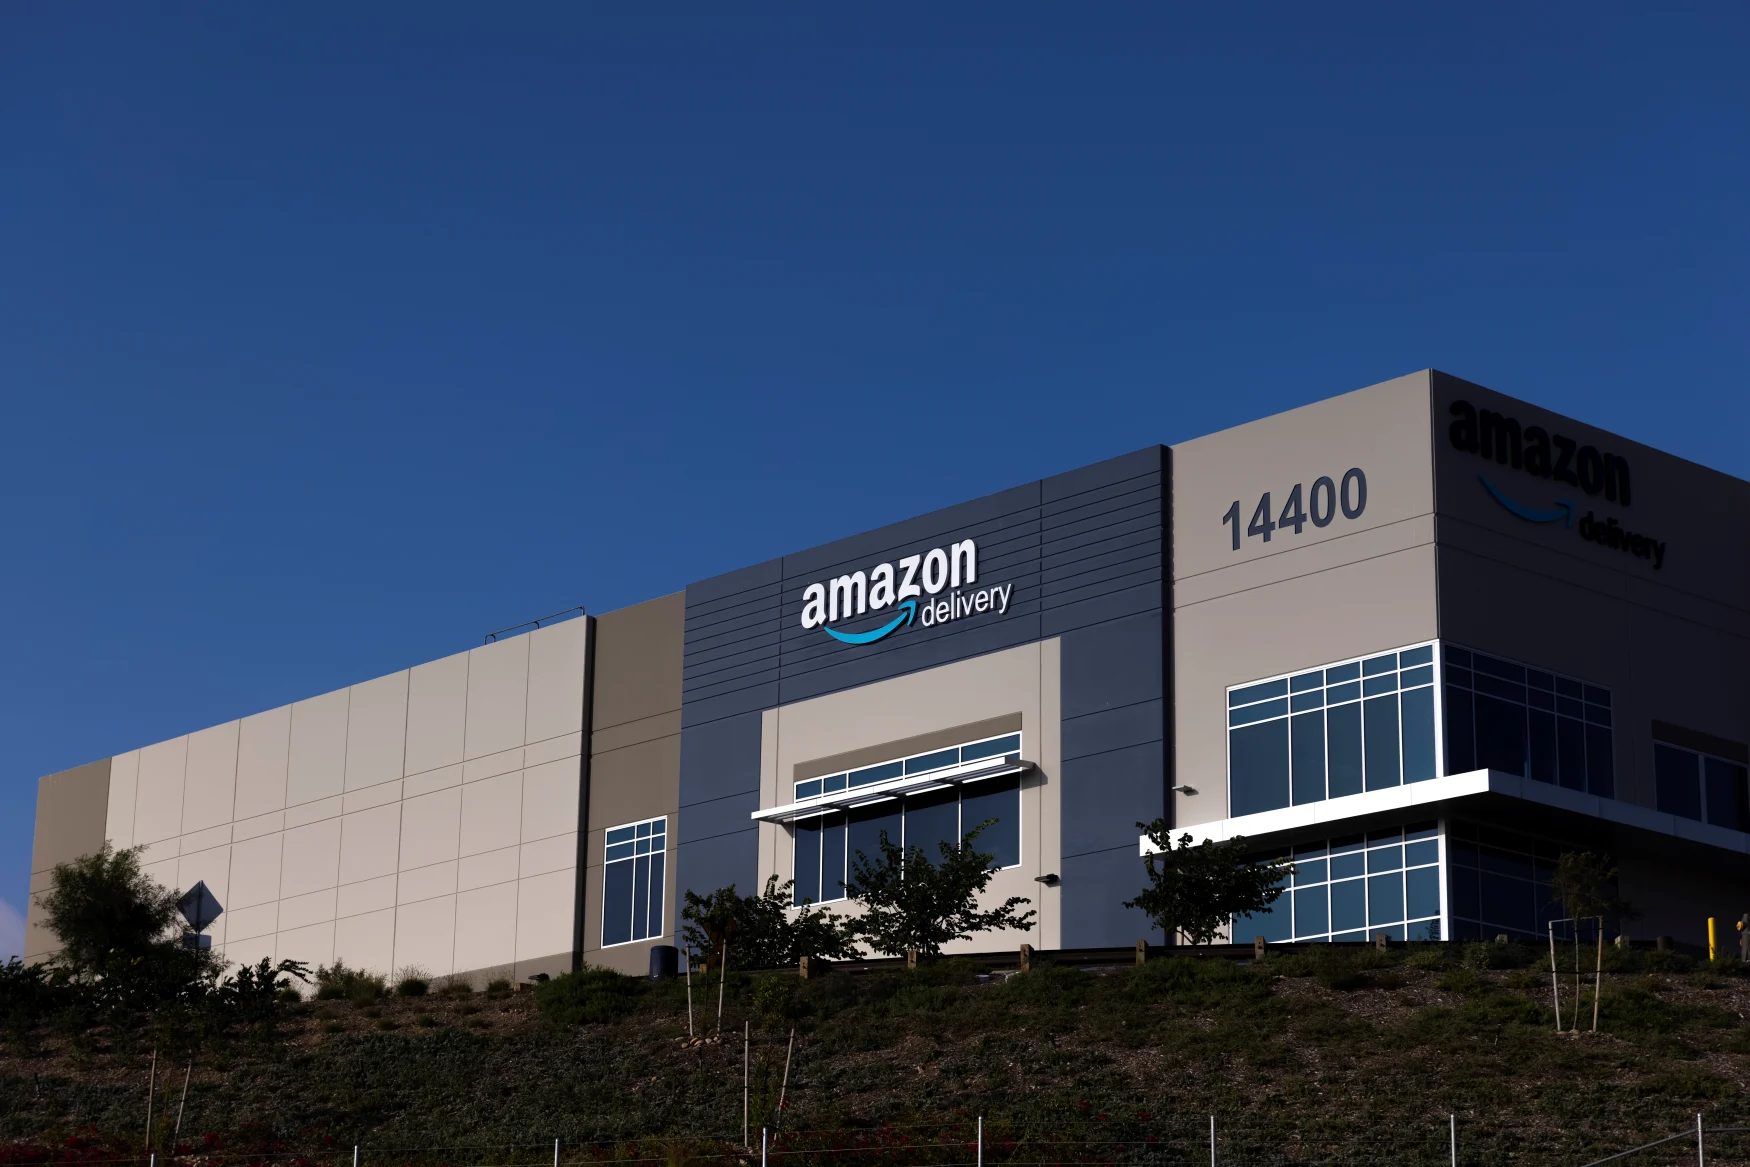 Amazon's warehouse facility DSD8 is shown in Poway, California, U.S., September 28, 2021. Picture taken September 28, 2021. REUTERS/Mike Blake